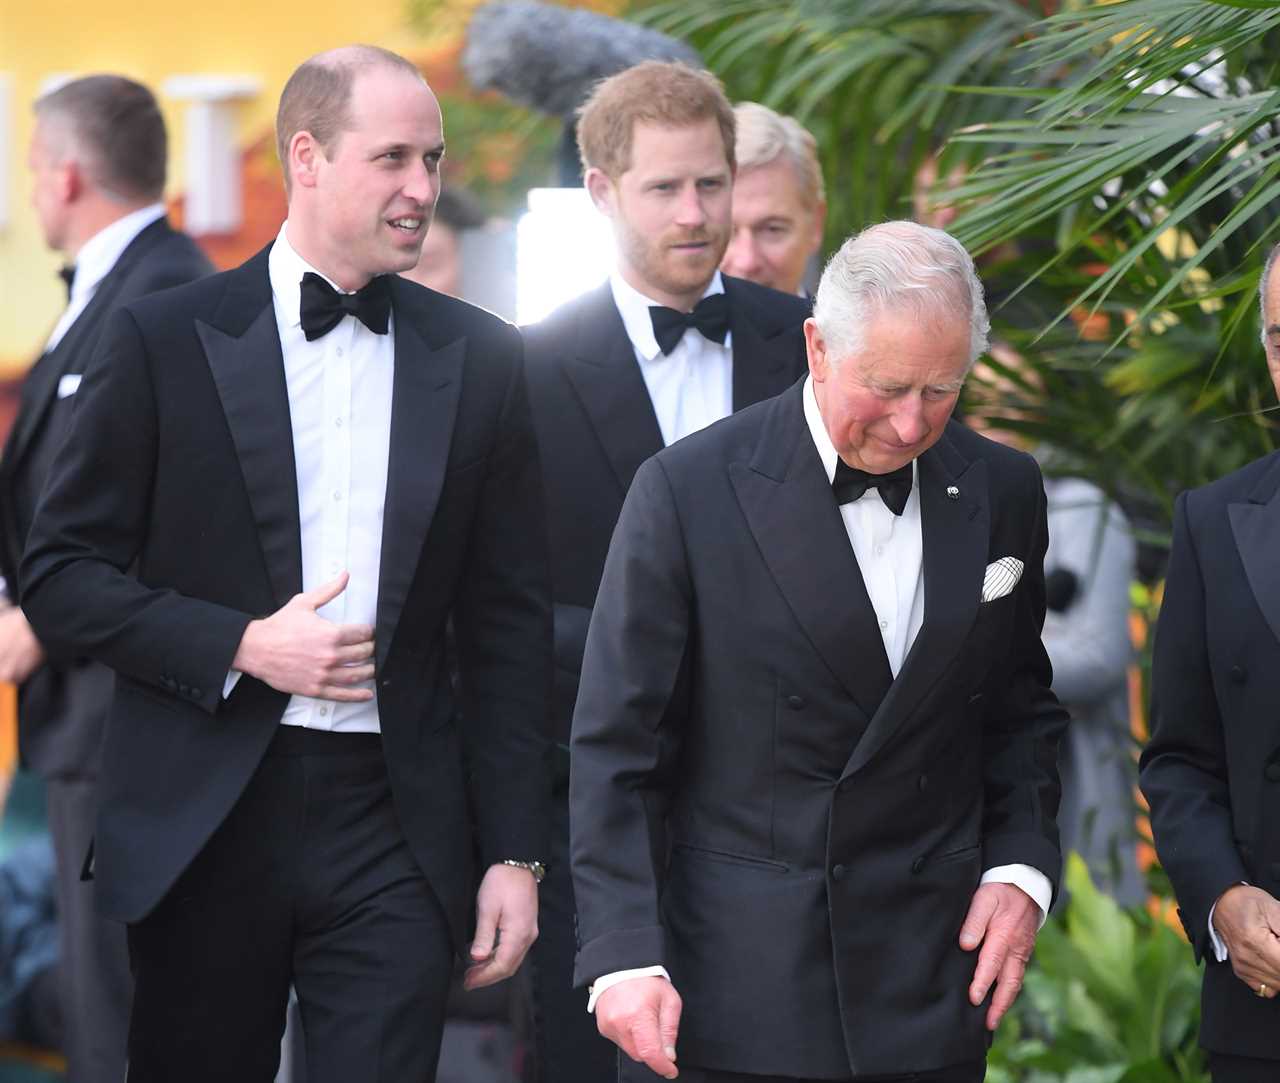 Prince Harry must be stripped of his Duke of Sussex title for ‘trashing’ the royal family, senior MPs demand